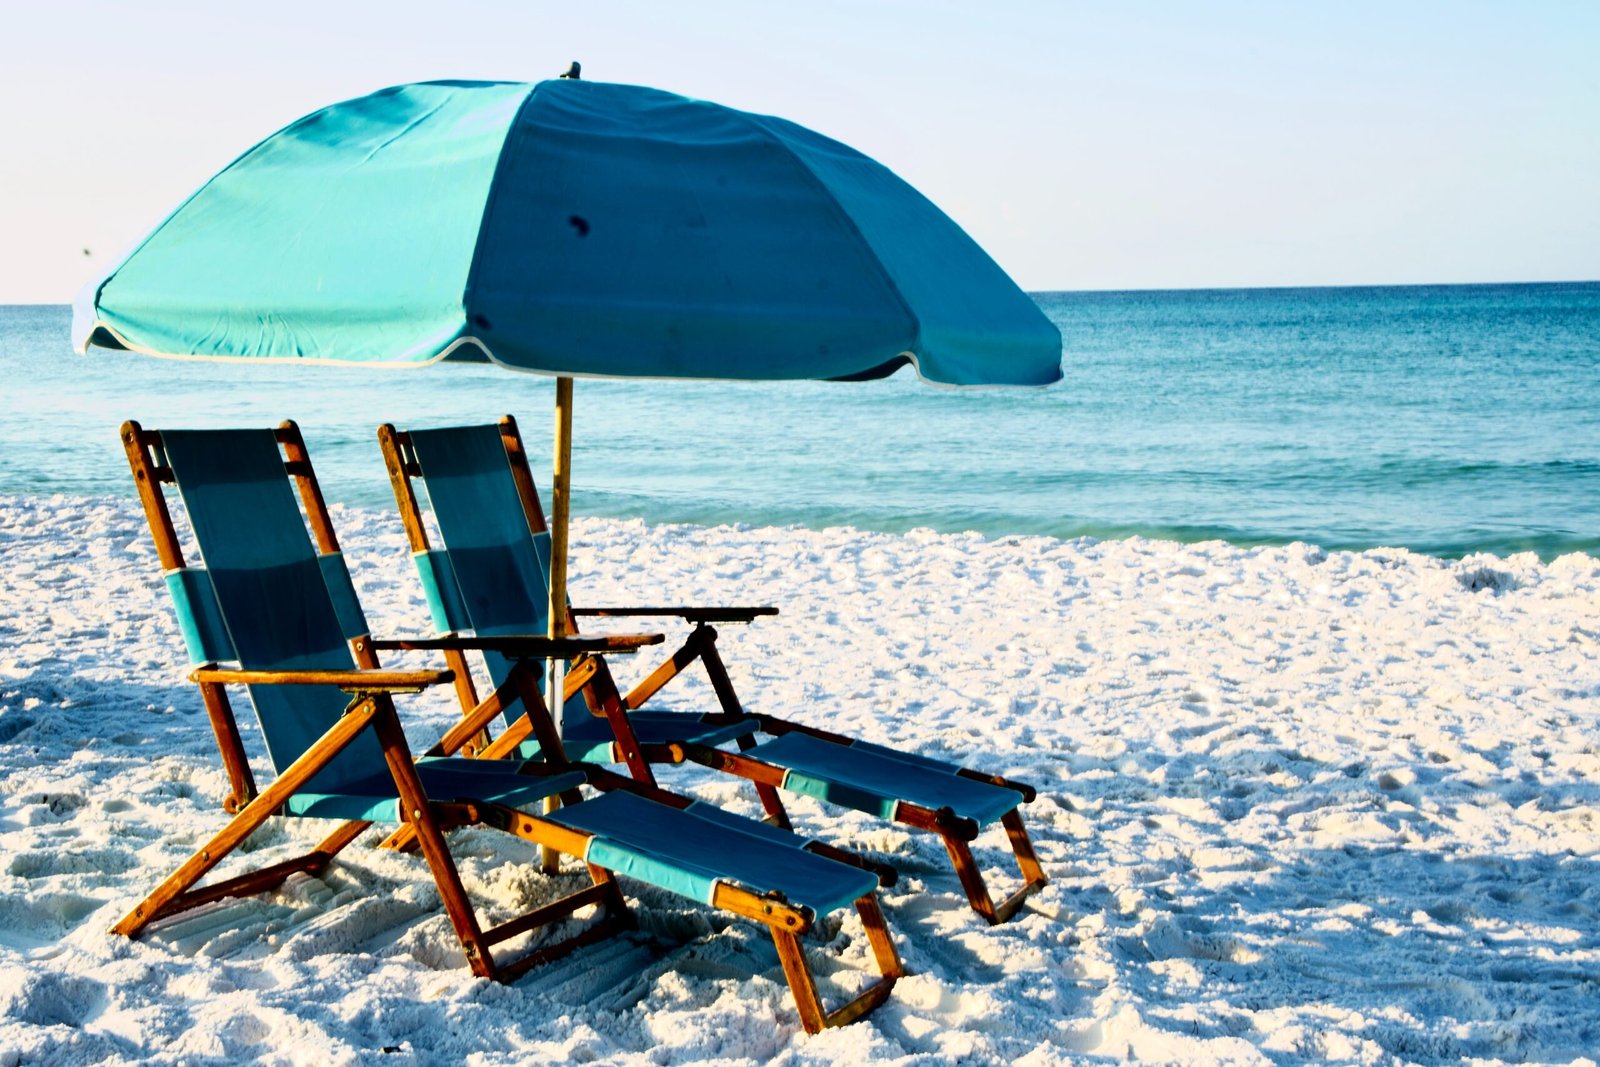 Best Family Beaches In Florida